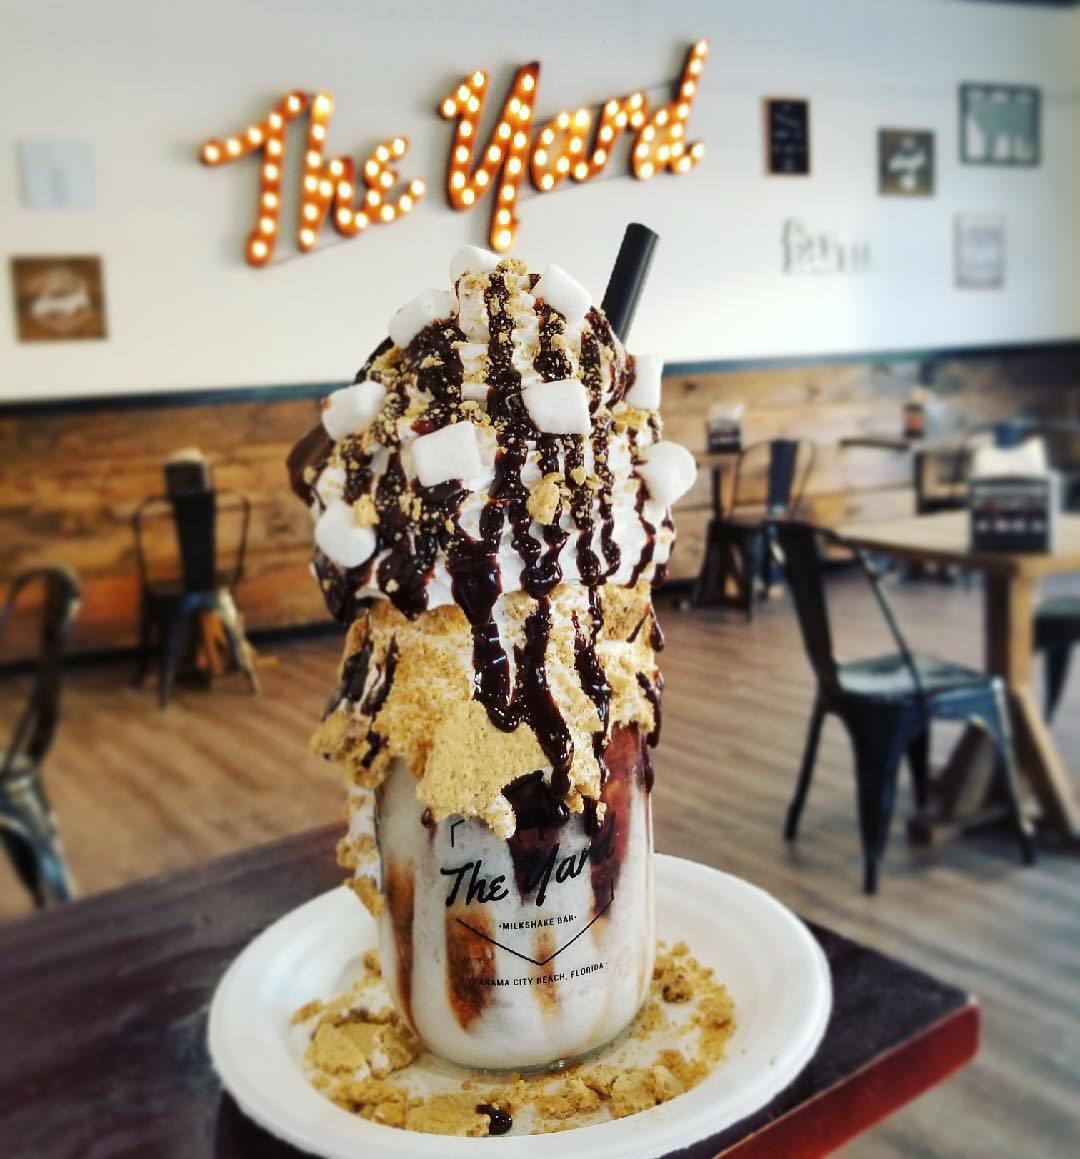 The Yard Milkshake Bar features offers shakes and sundaes like The Cereal Killer, Old School Banana Split, Doughnut Touch my Coffees and Cream, and Salted Caramel Cheesecake.